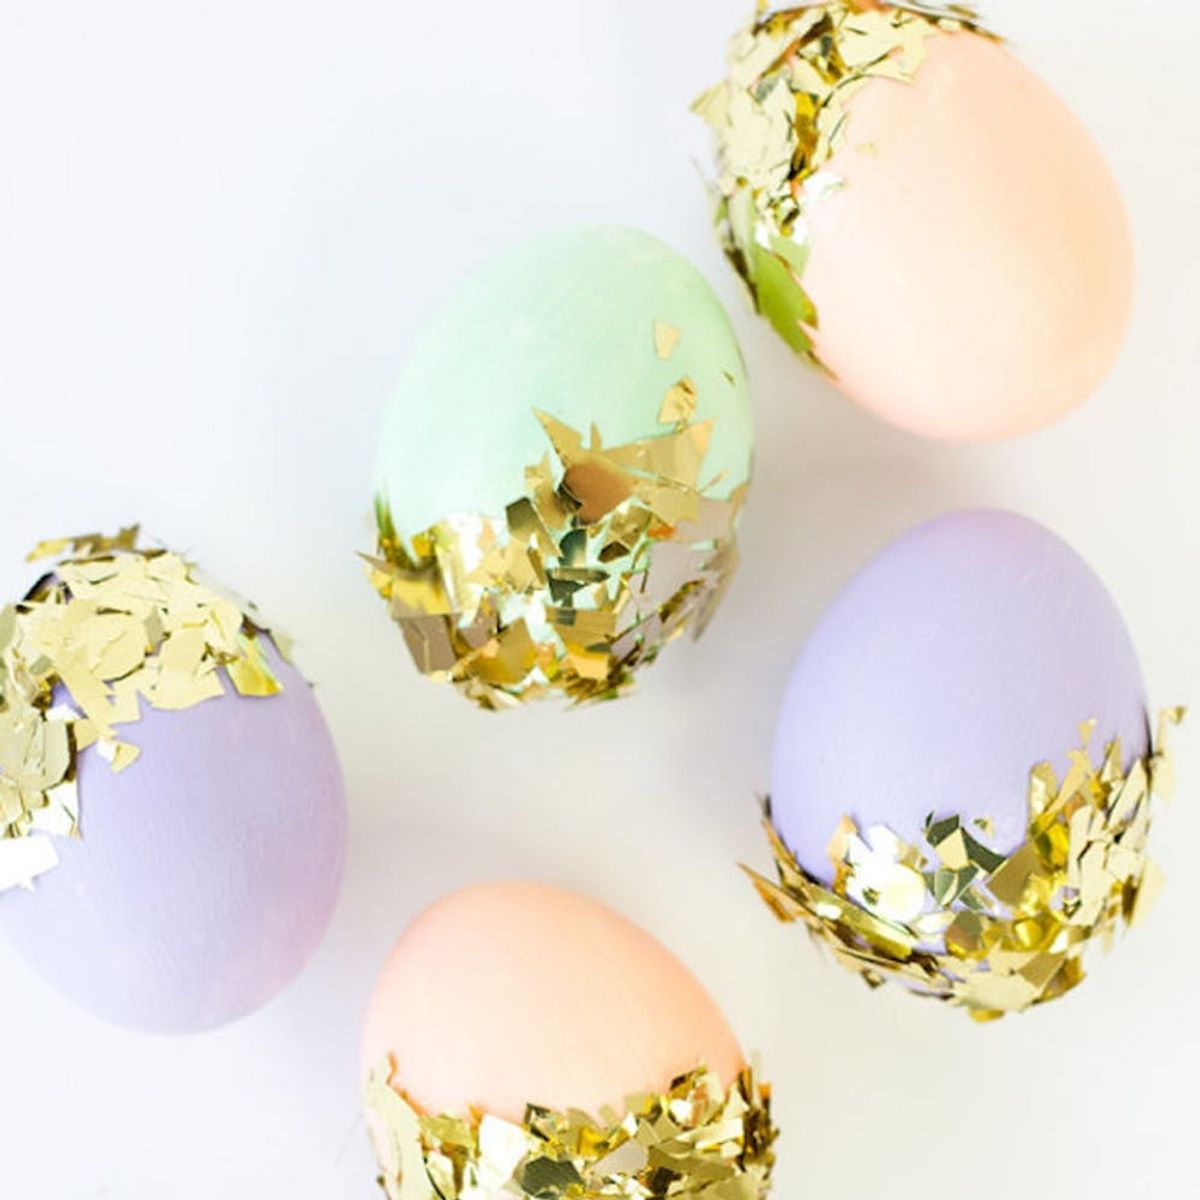 The Trendiest Easter Decor For 2018 According to Pinterest